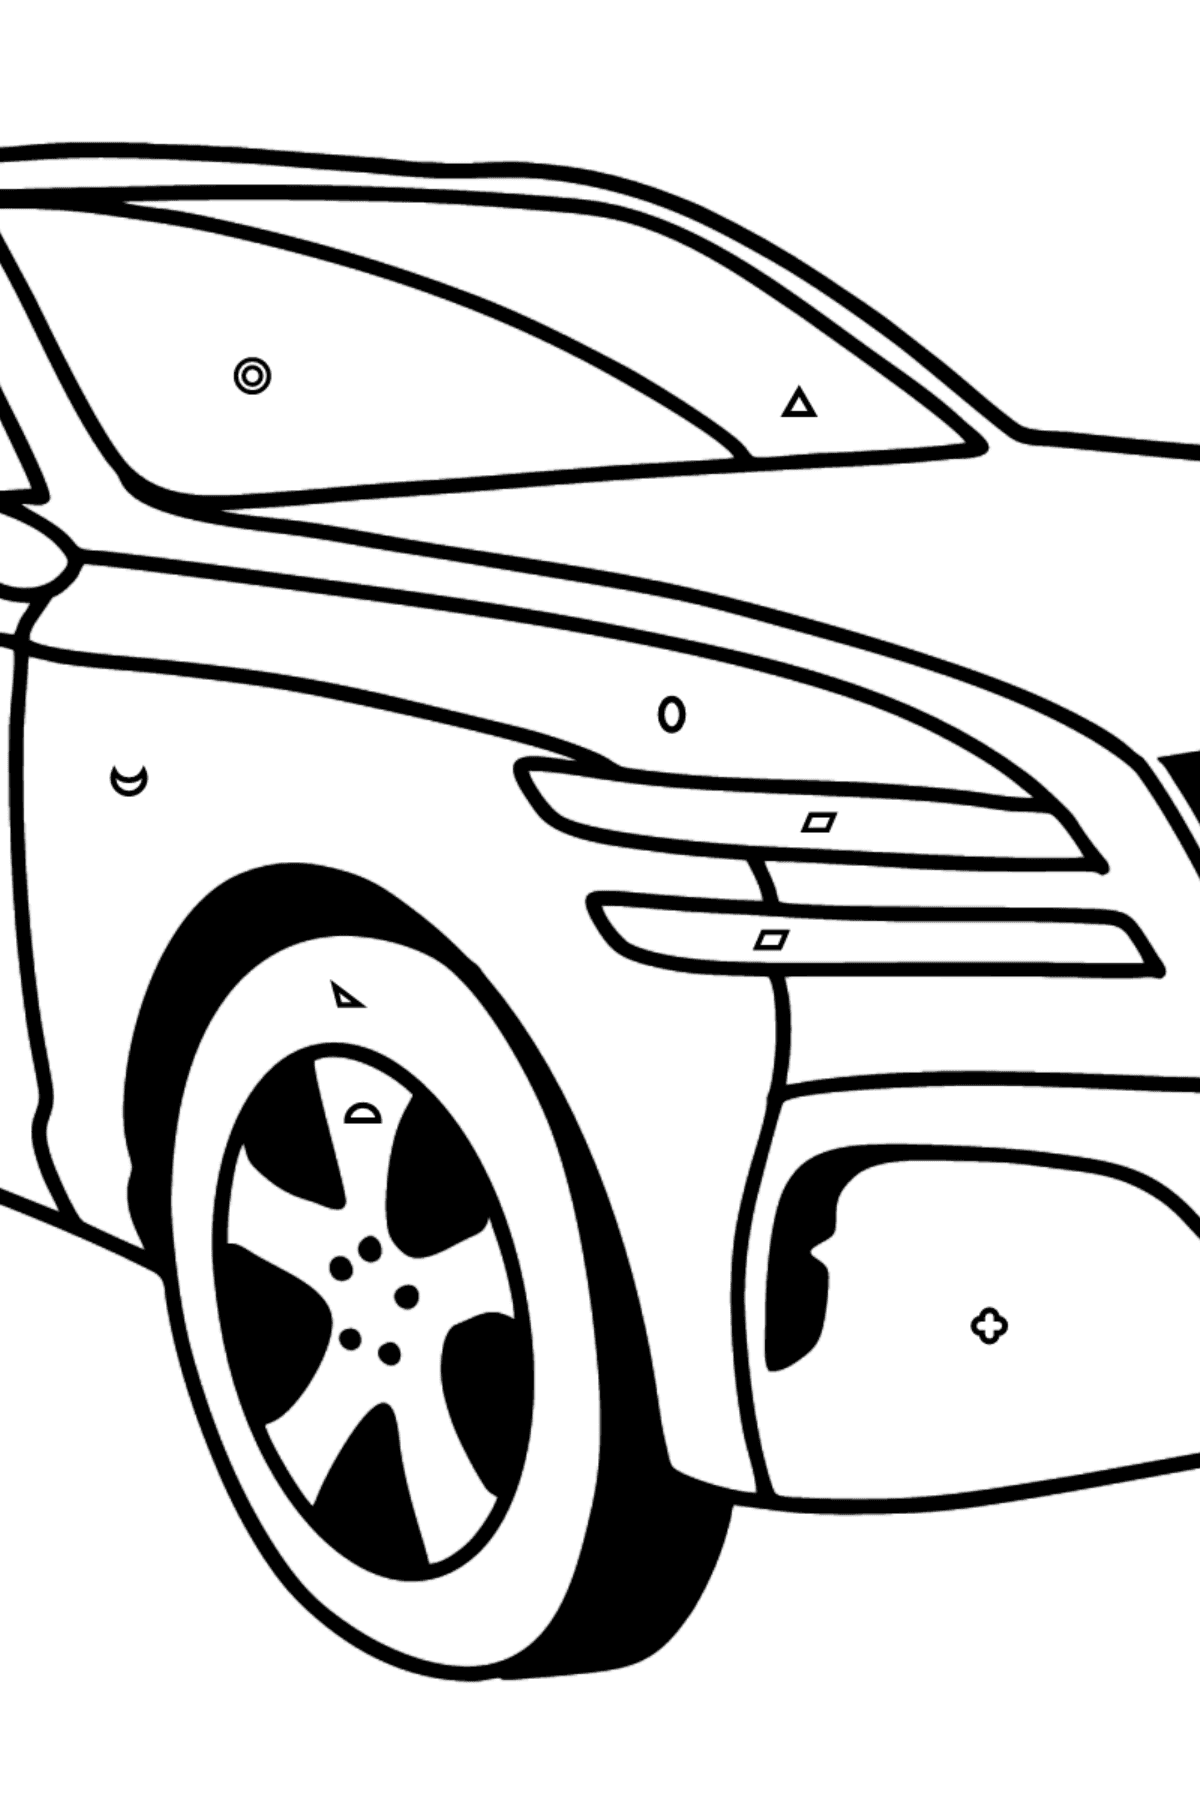 Genesis car coloring page - Coloring by Geometric Shapes for Kids